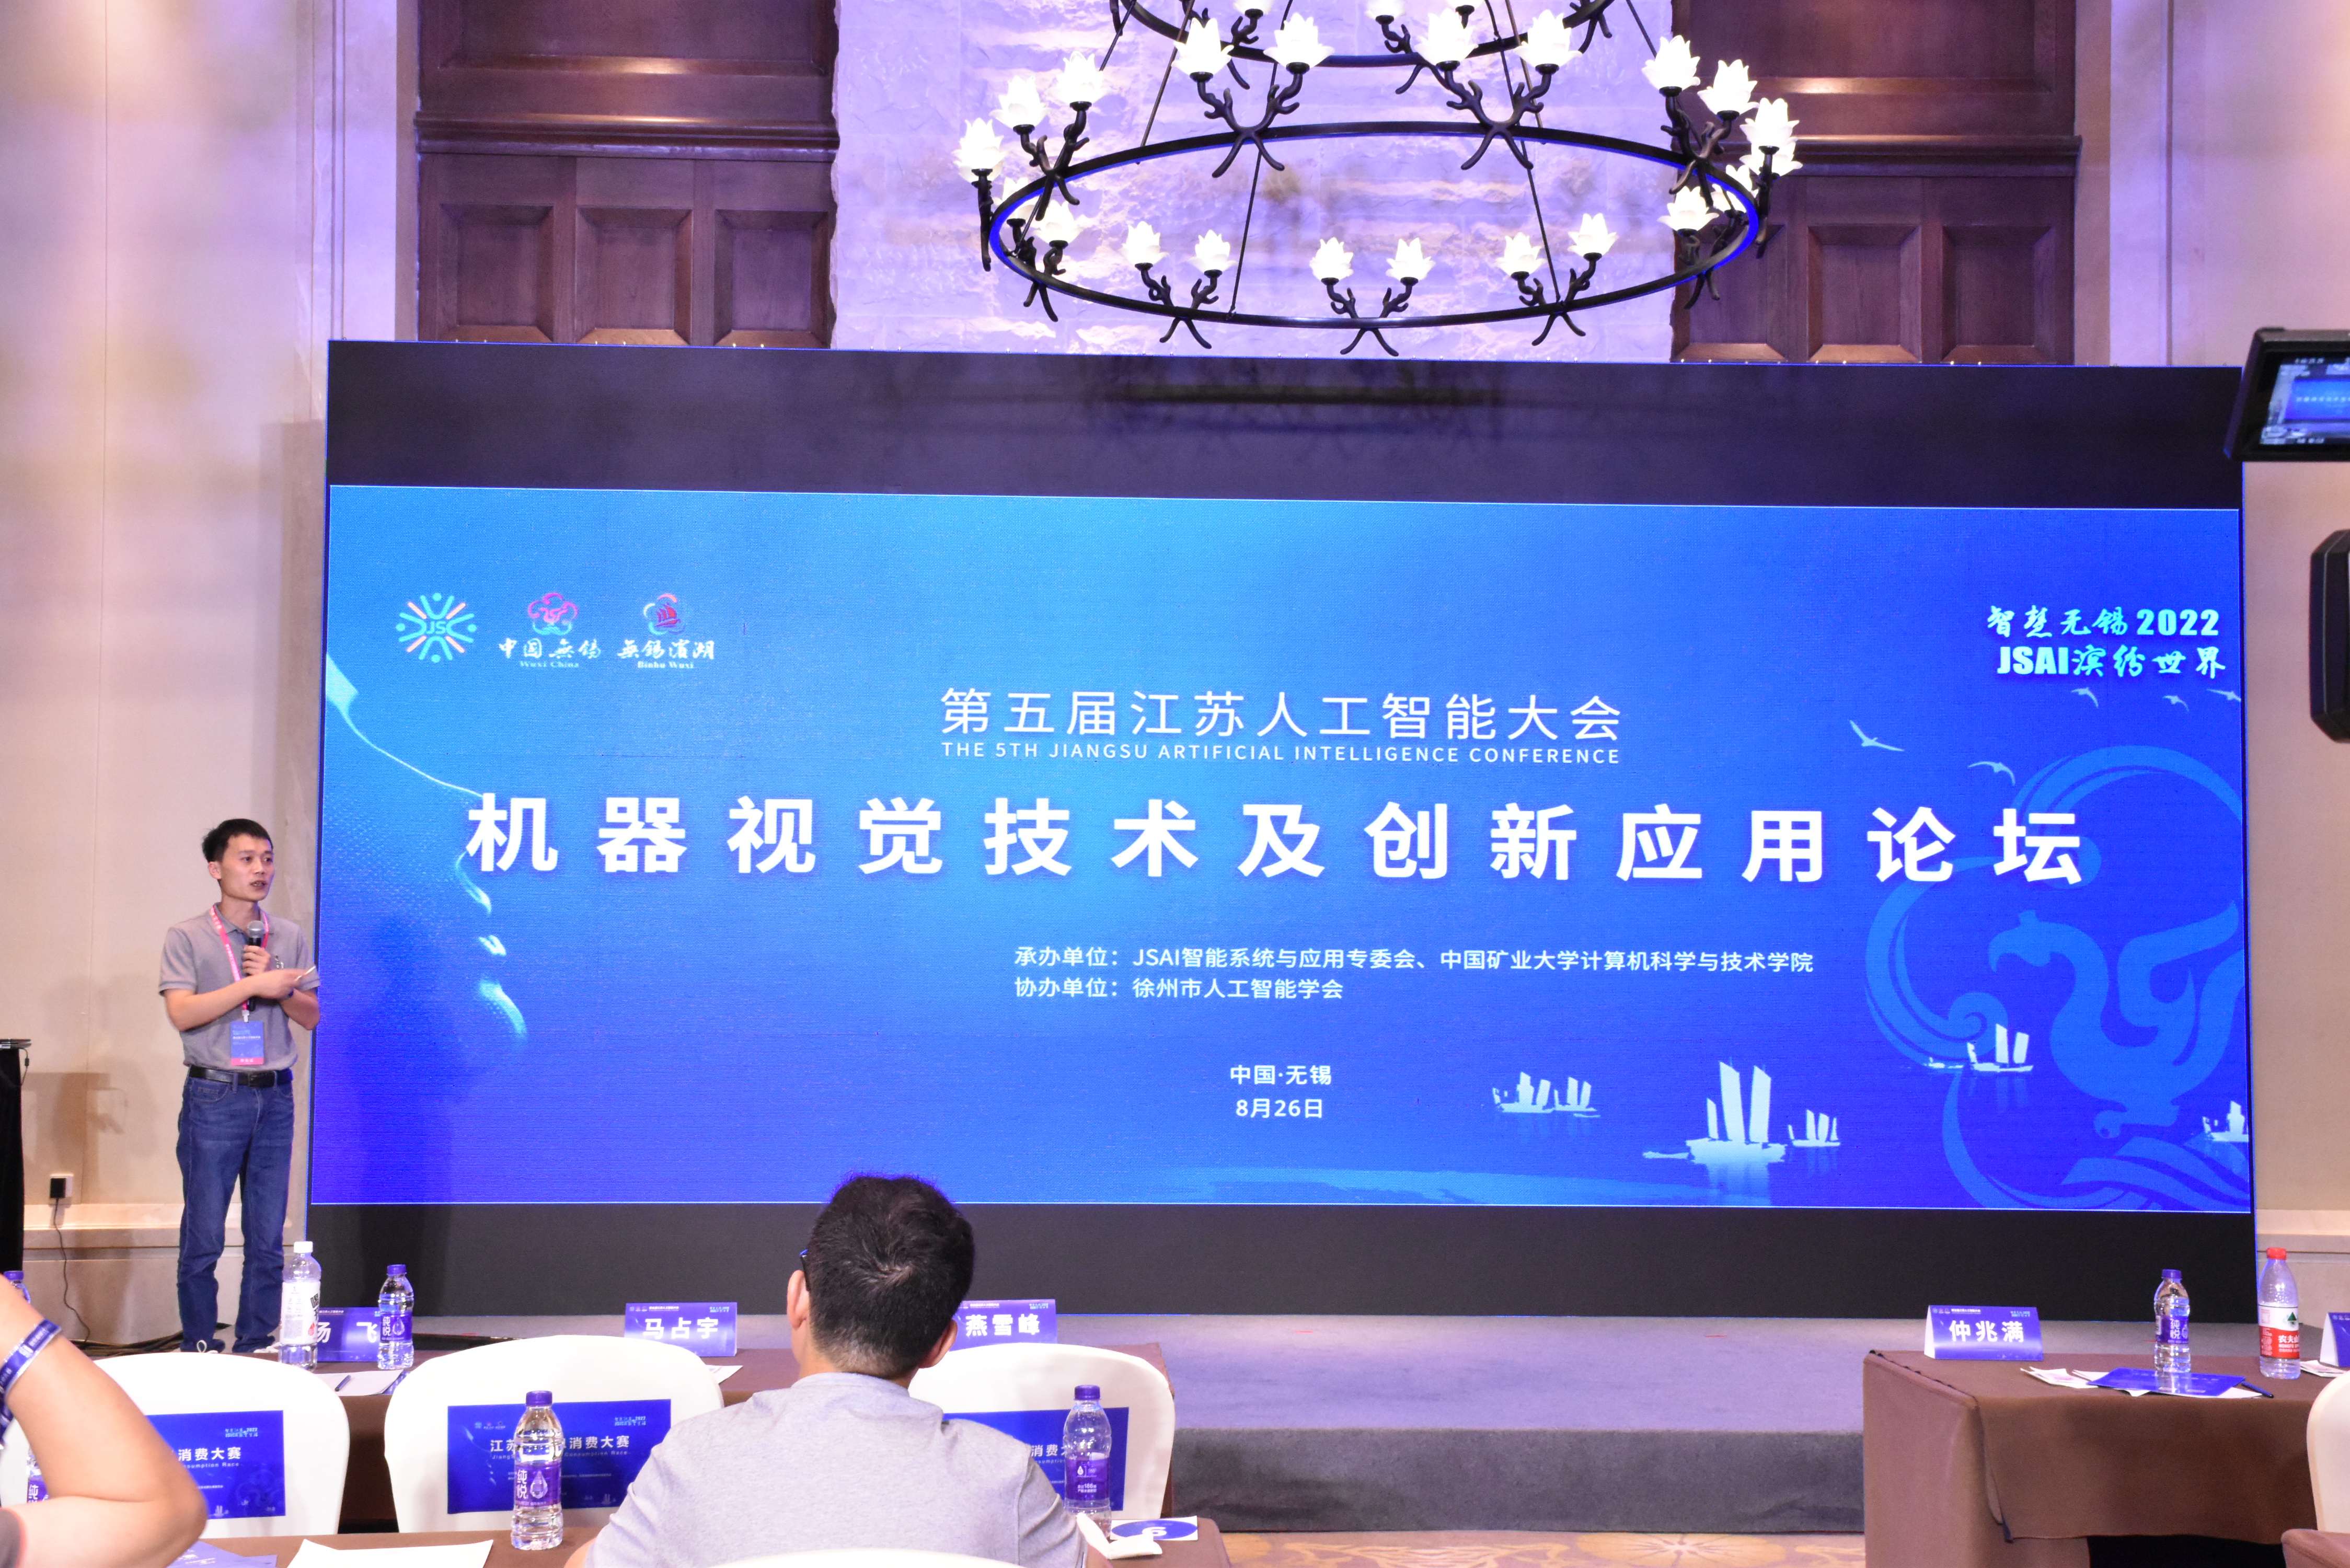 Minivision Technology Attends the 2022 Jiangsu Artificial Intelligence Conference to Explore New Possibilities of Machine Vision Applications